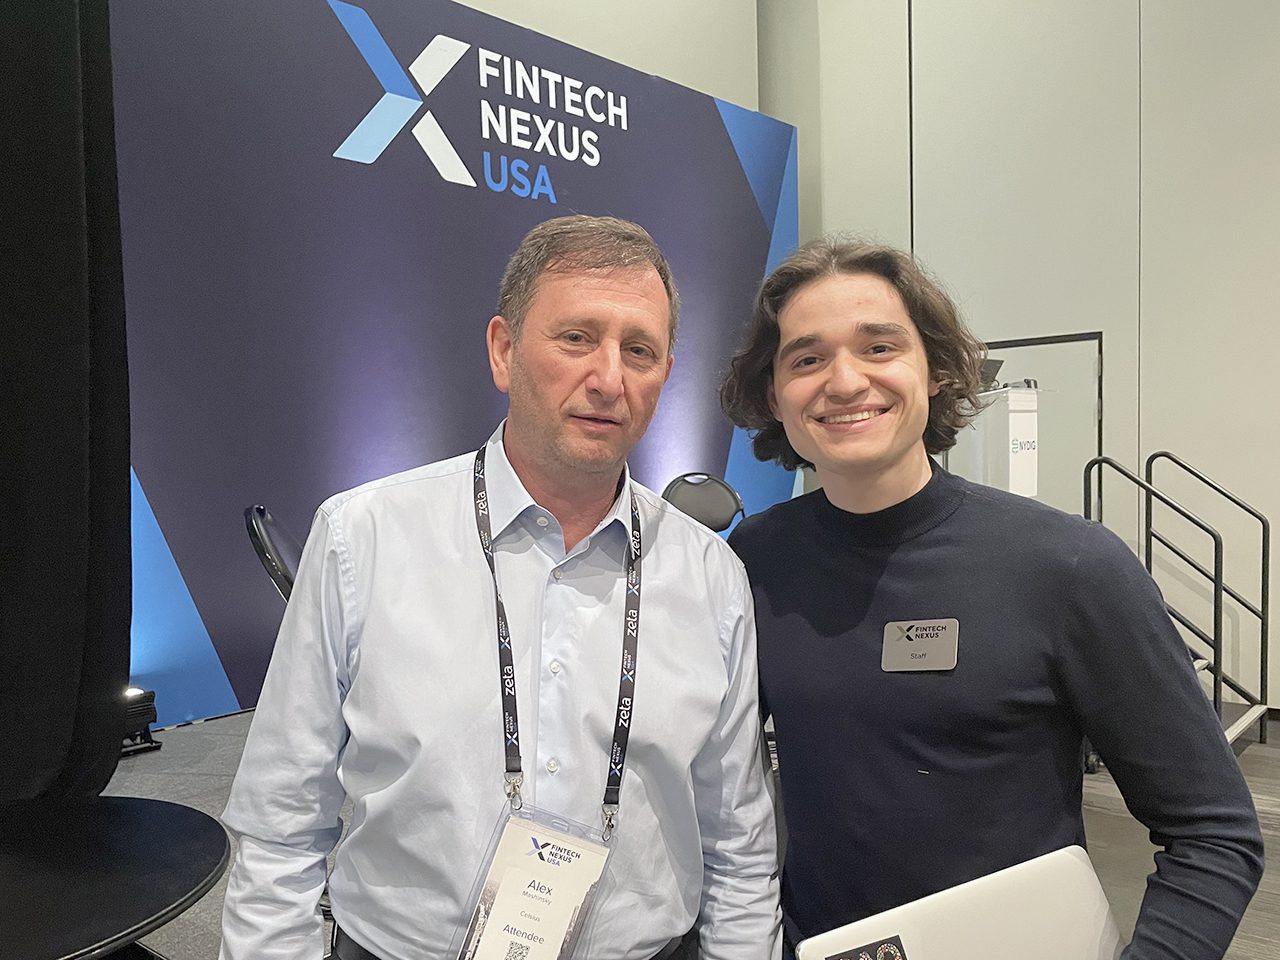 Alex Mashinsky meets with attendees after his session at Fintech Nexus USA at the Javitz Center in New York City.